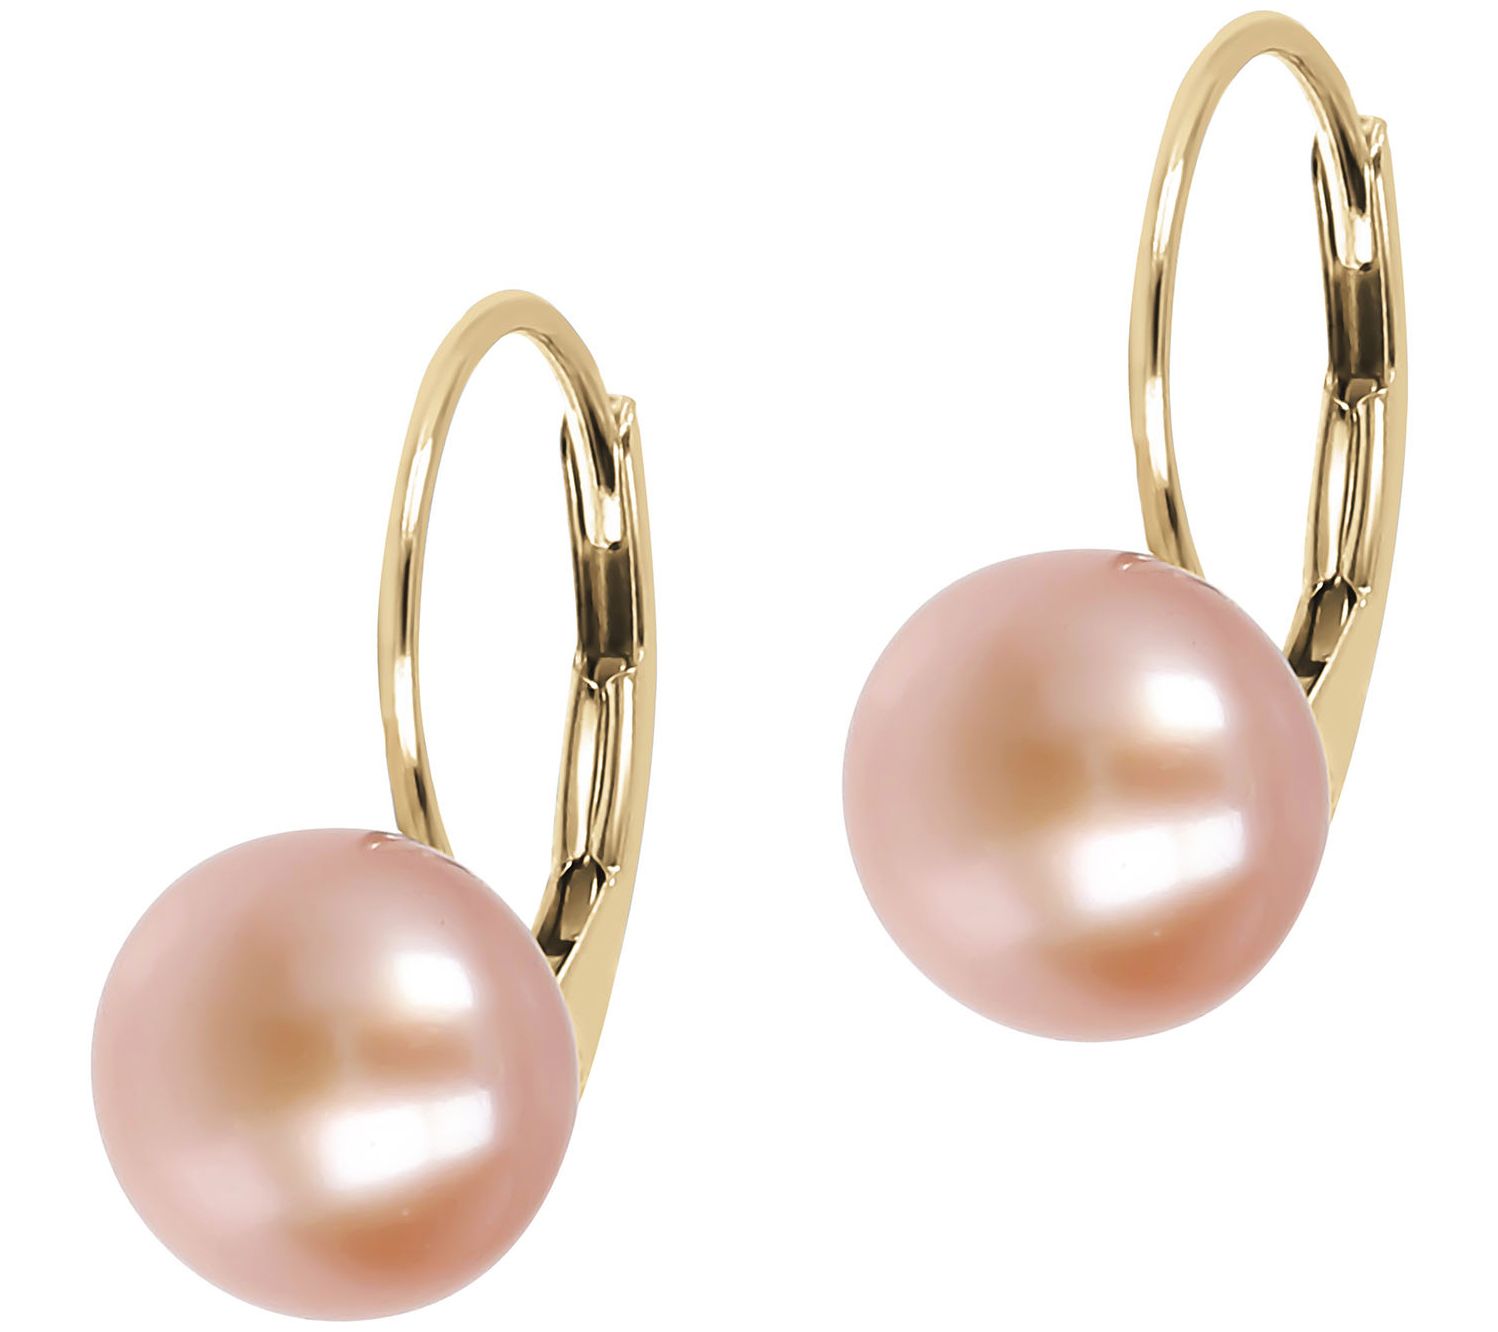 Light Weight Earrings: Elevating Style and Comfort - Clean Origin Blog